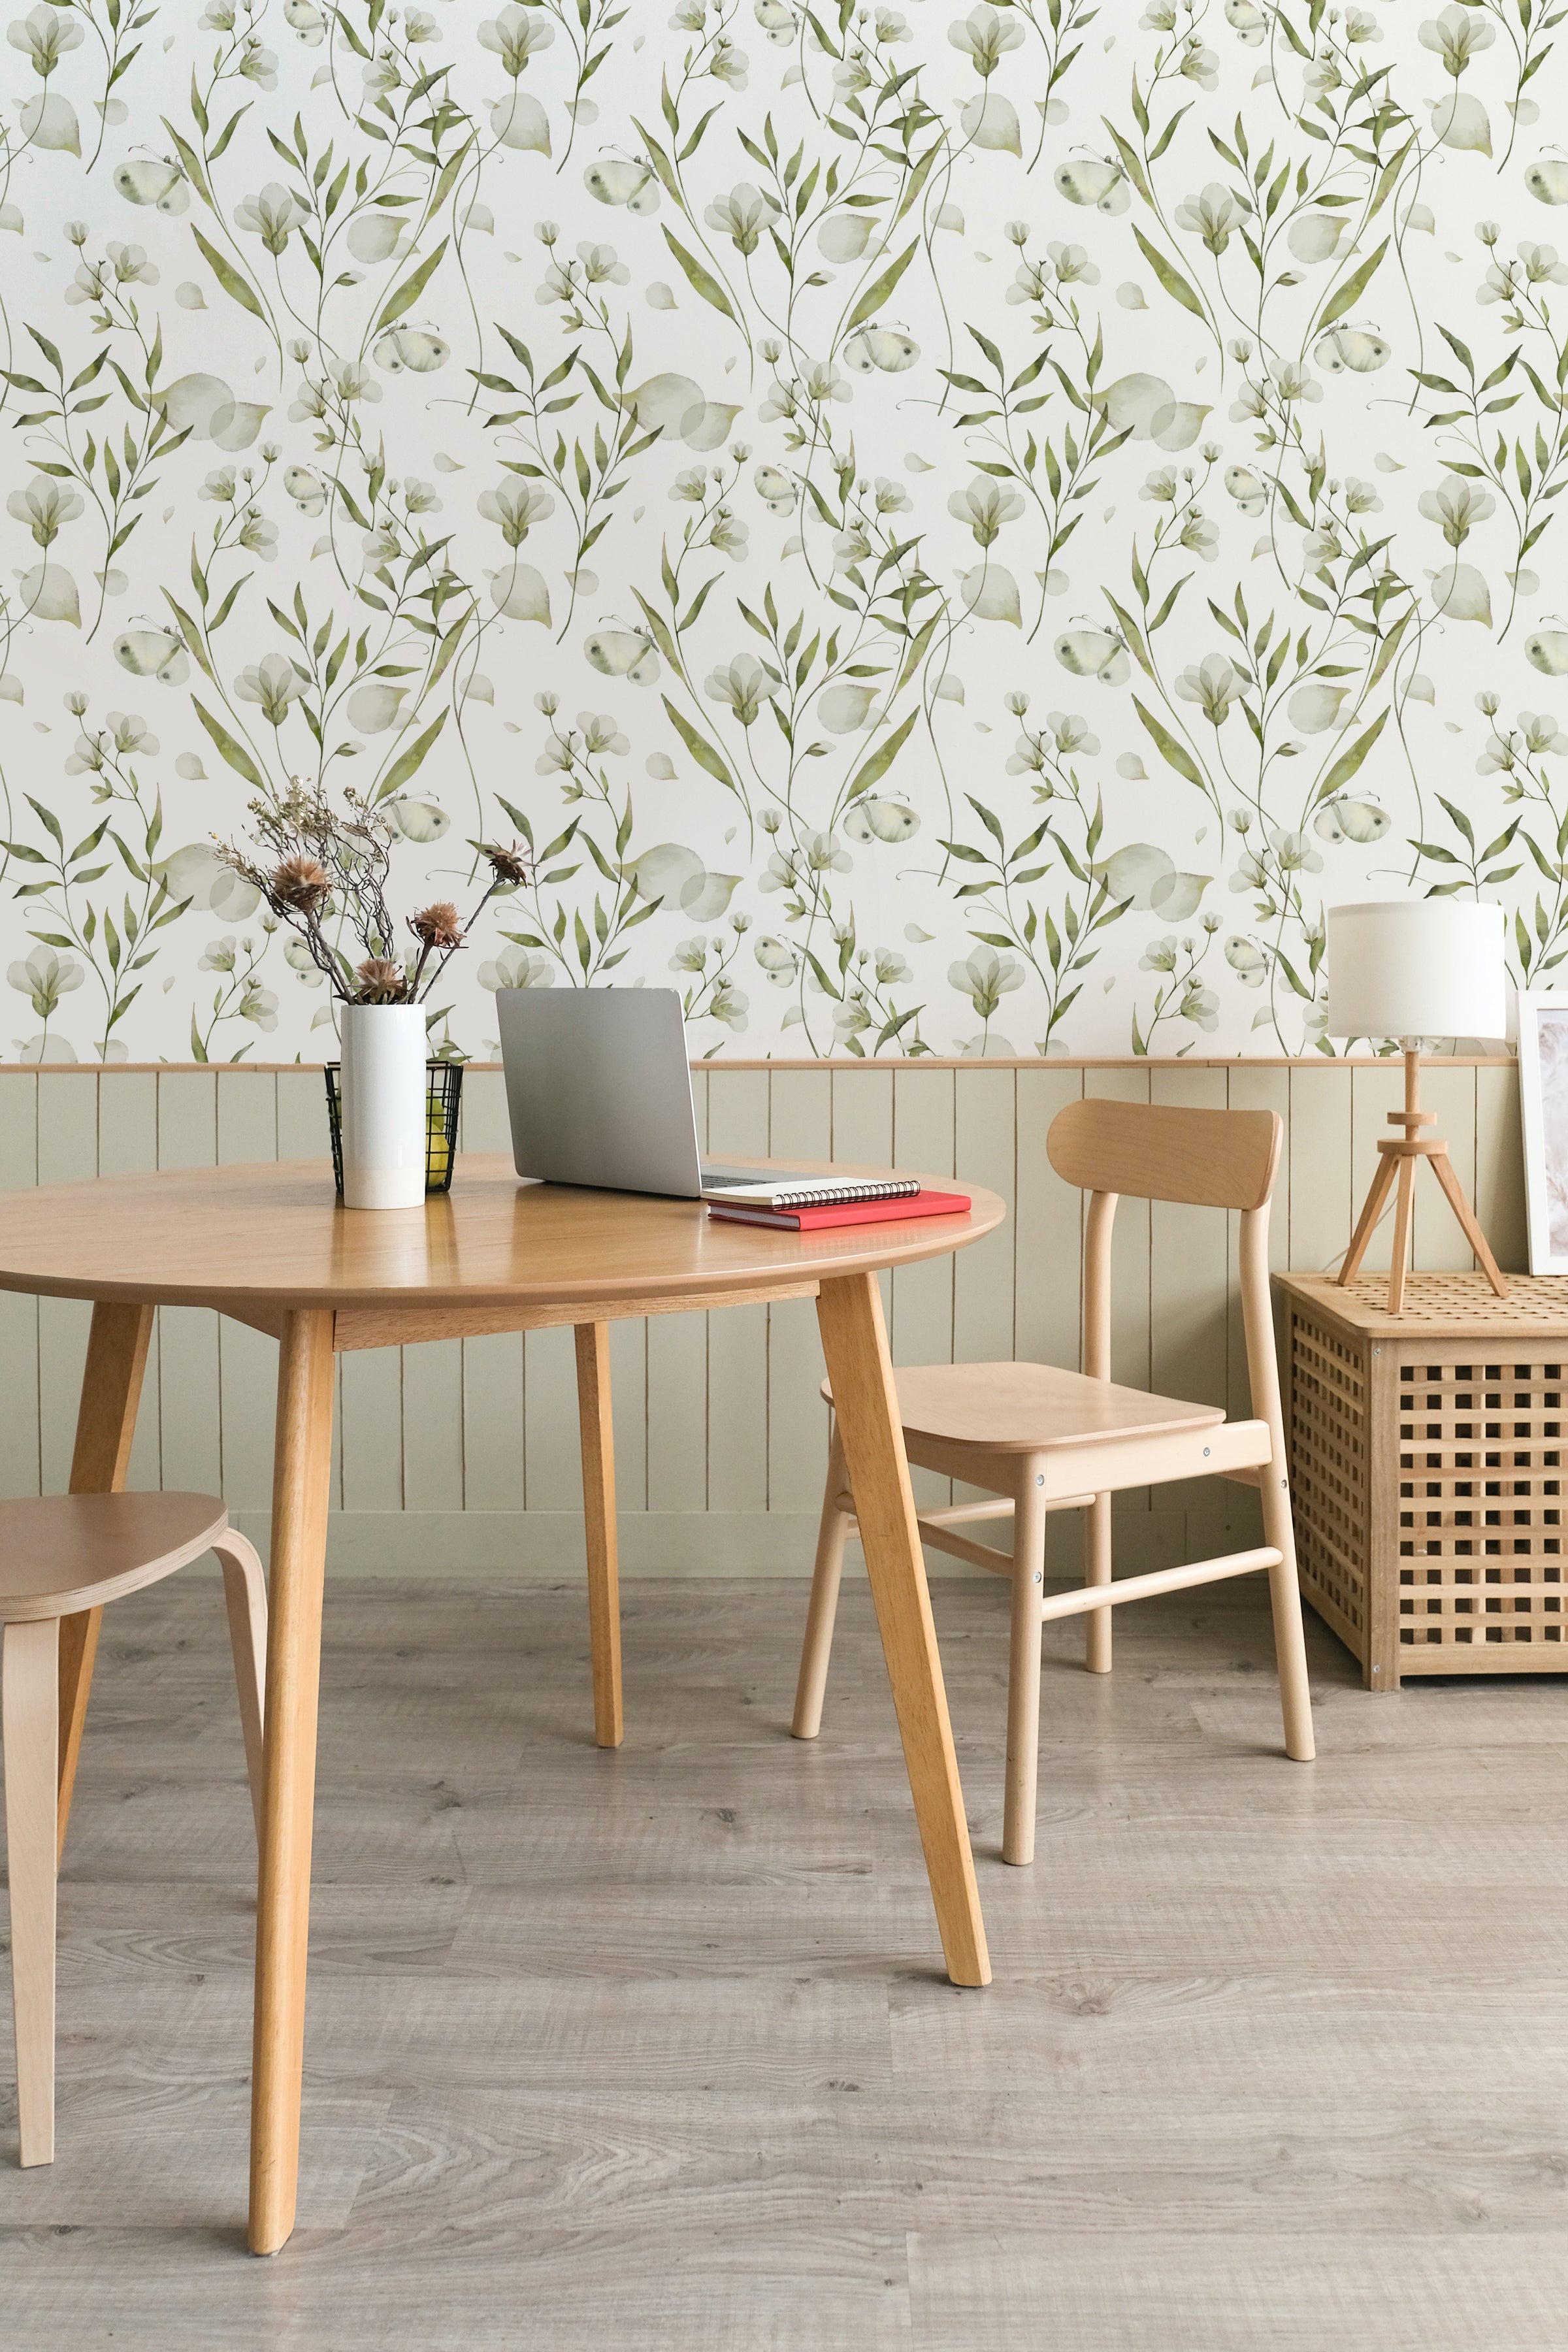 An elegant work area with the 'Botanical Bliss Wallpaper' gracing the wall, featuring a sophisticated pattern of soft green botanicals and white blooms. The natural theme is complemented by a wooden table, chairs, decorative vases with dried plants, and a laptop, creating a harmonious and productive environment